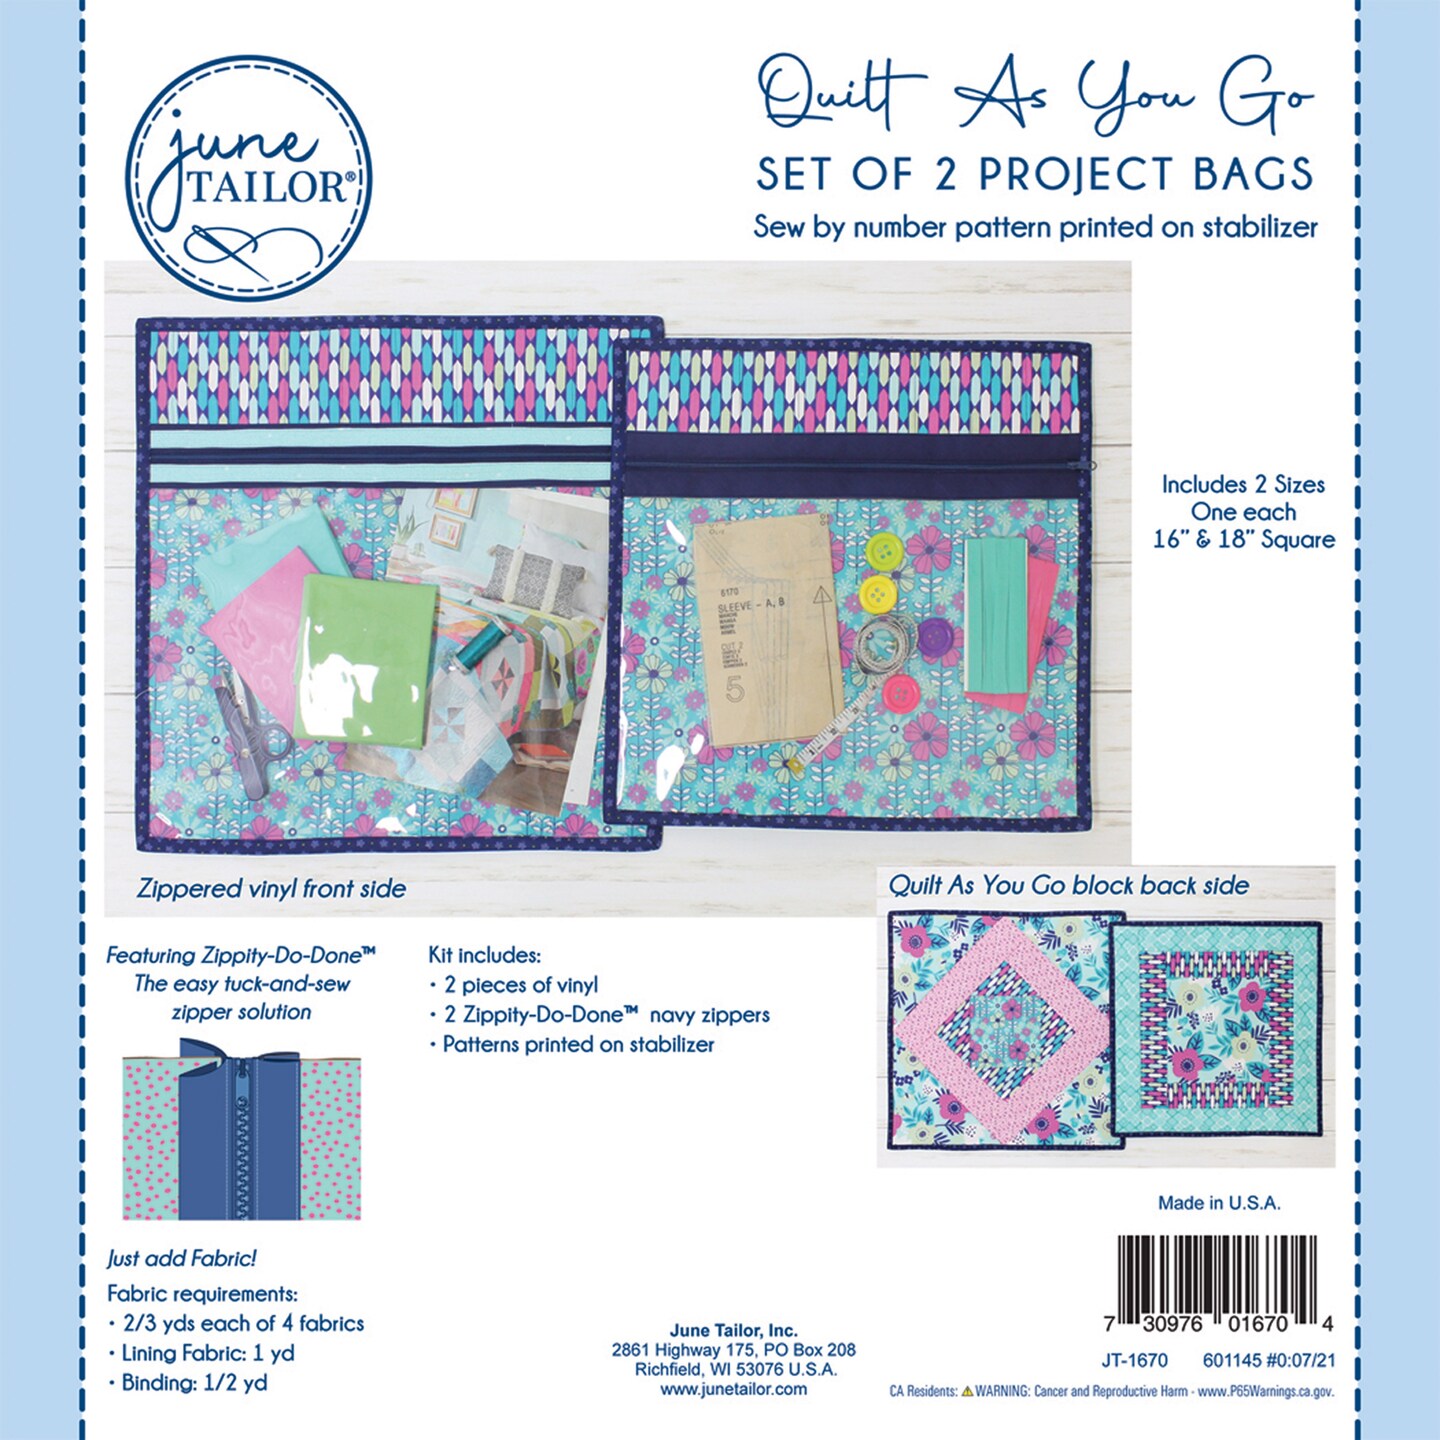 June Tailor Quilt As You Go Project Bag Kit-Navy Zippity-Do-Done